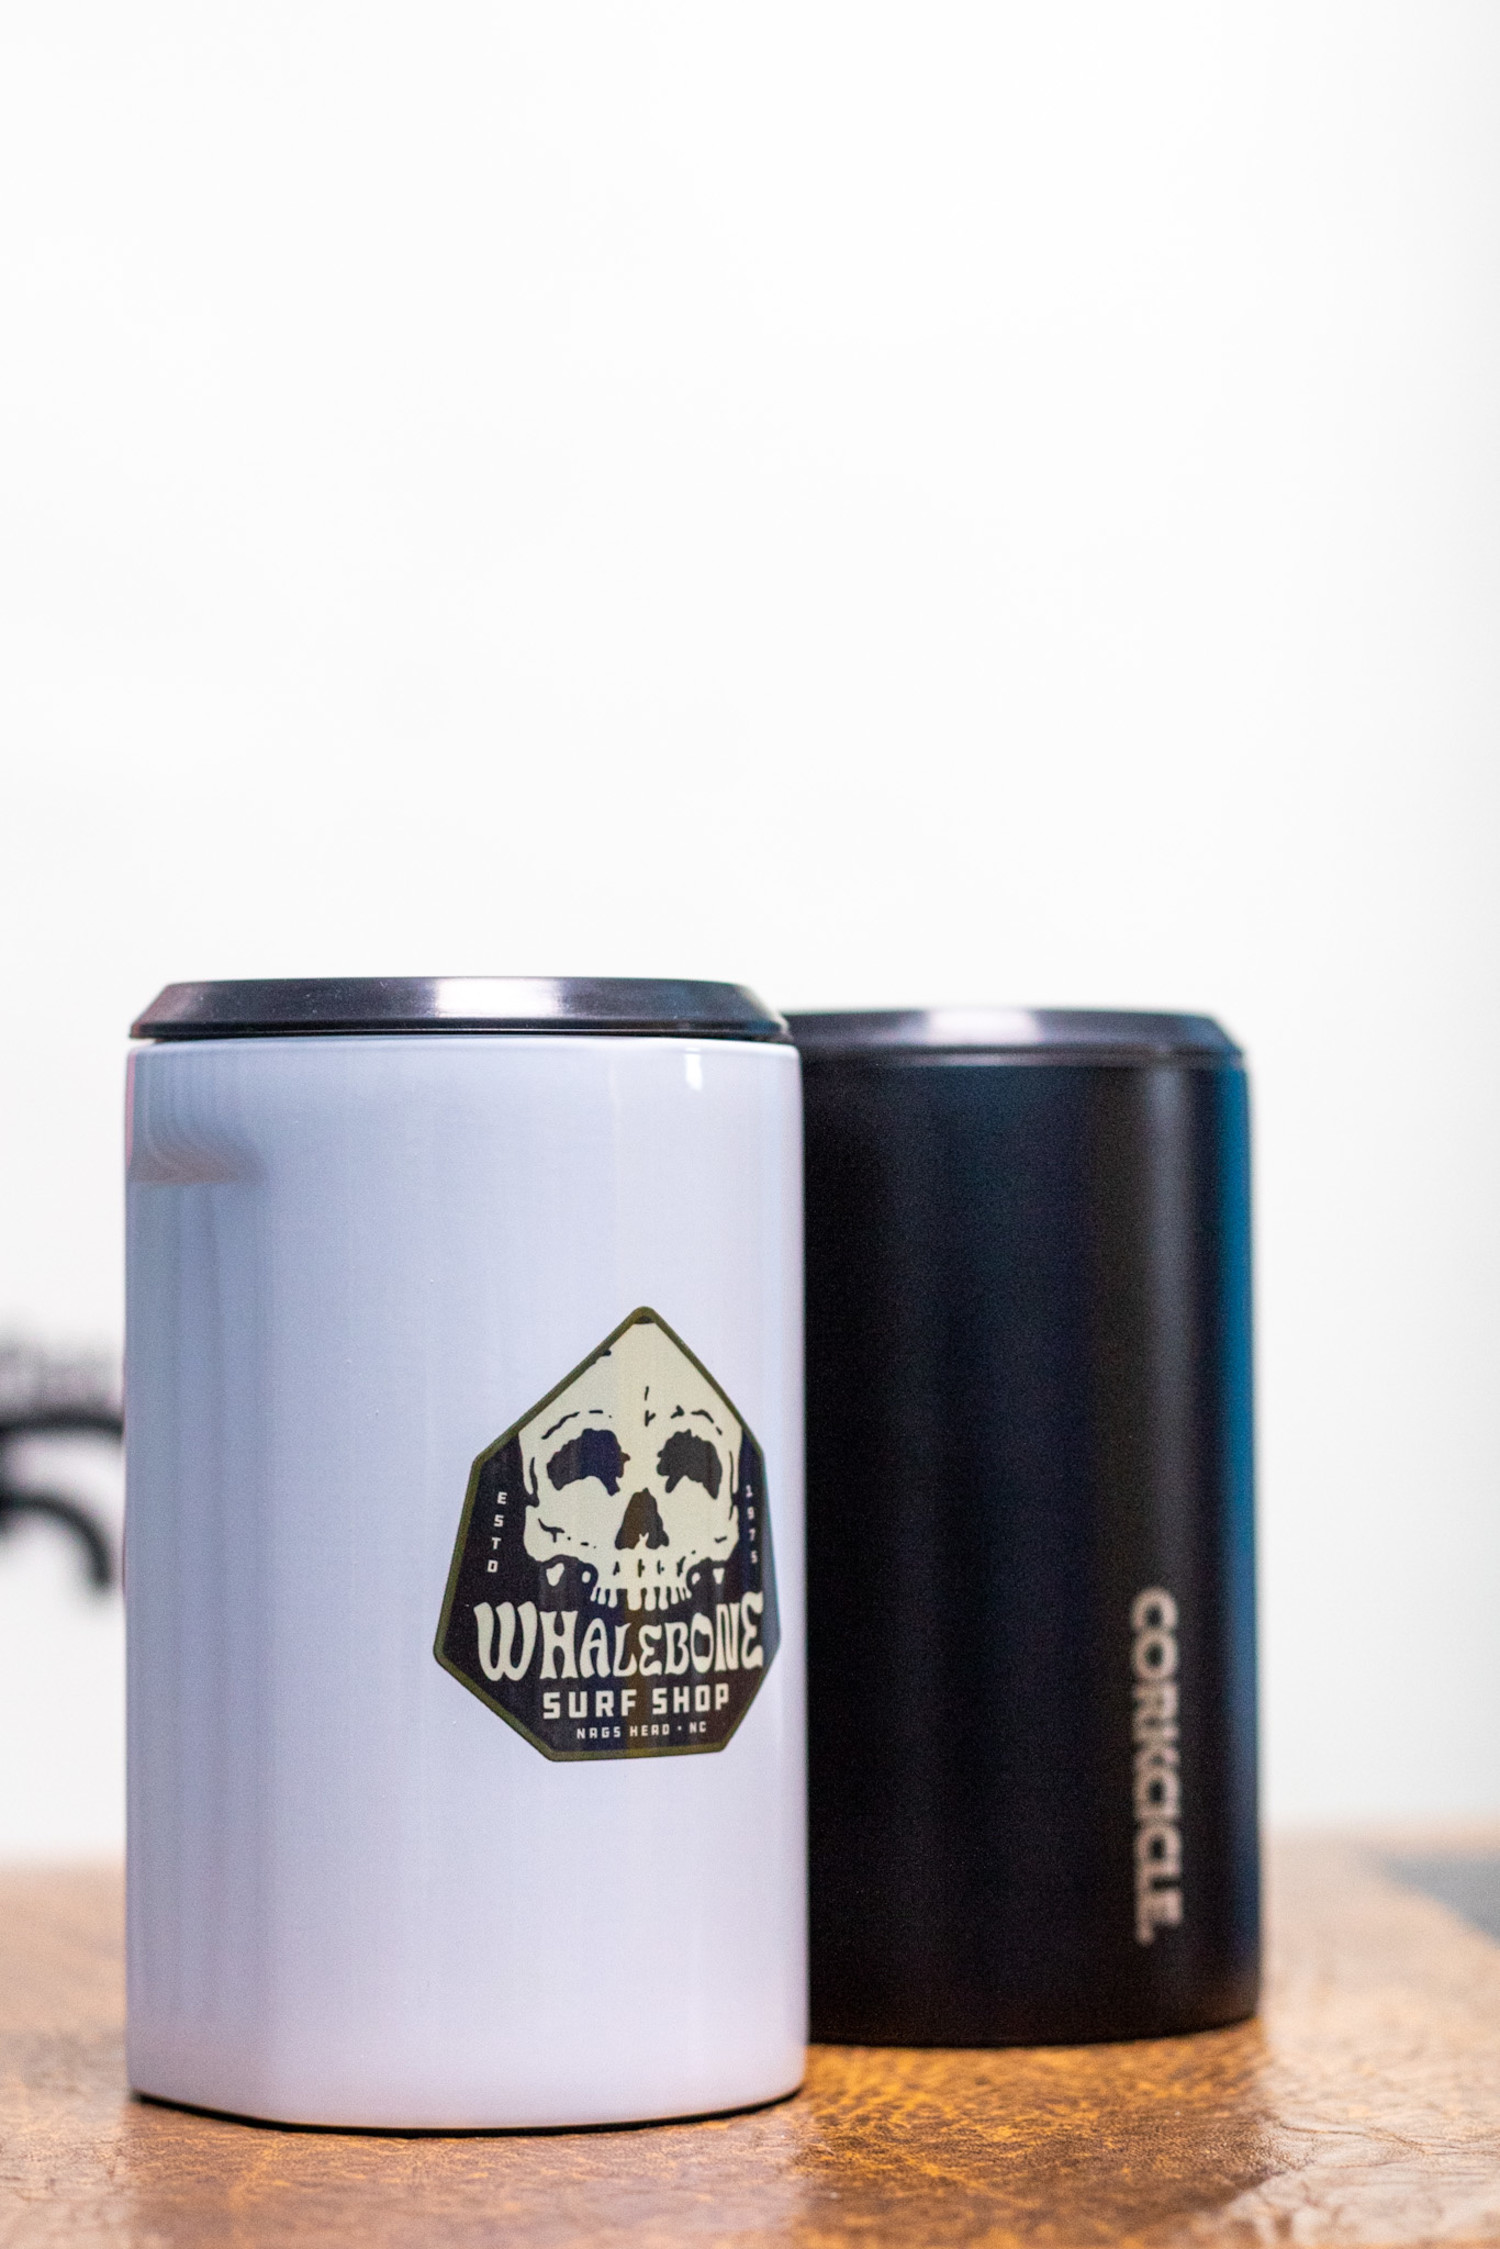 Corkcicle classic can cooler